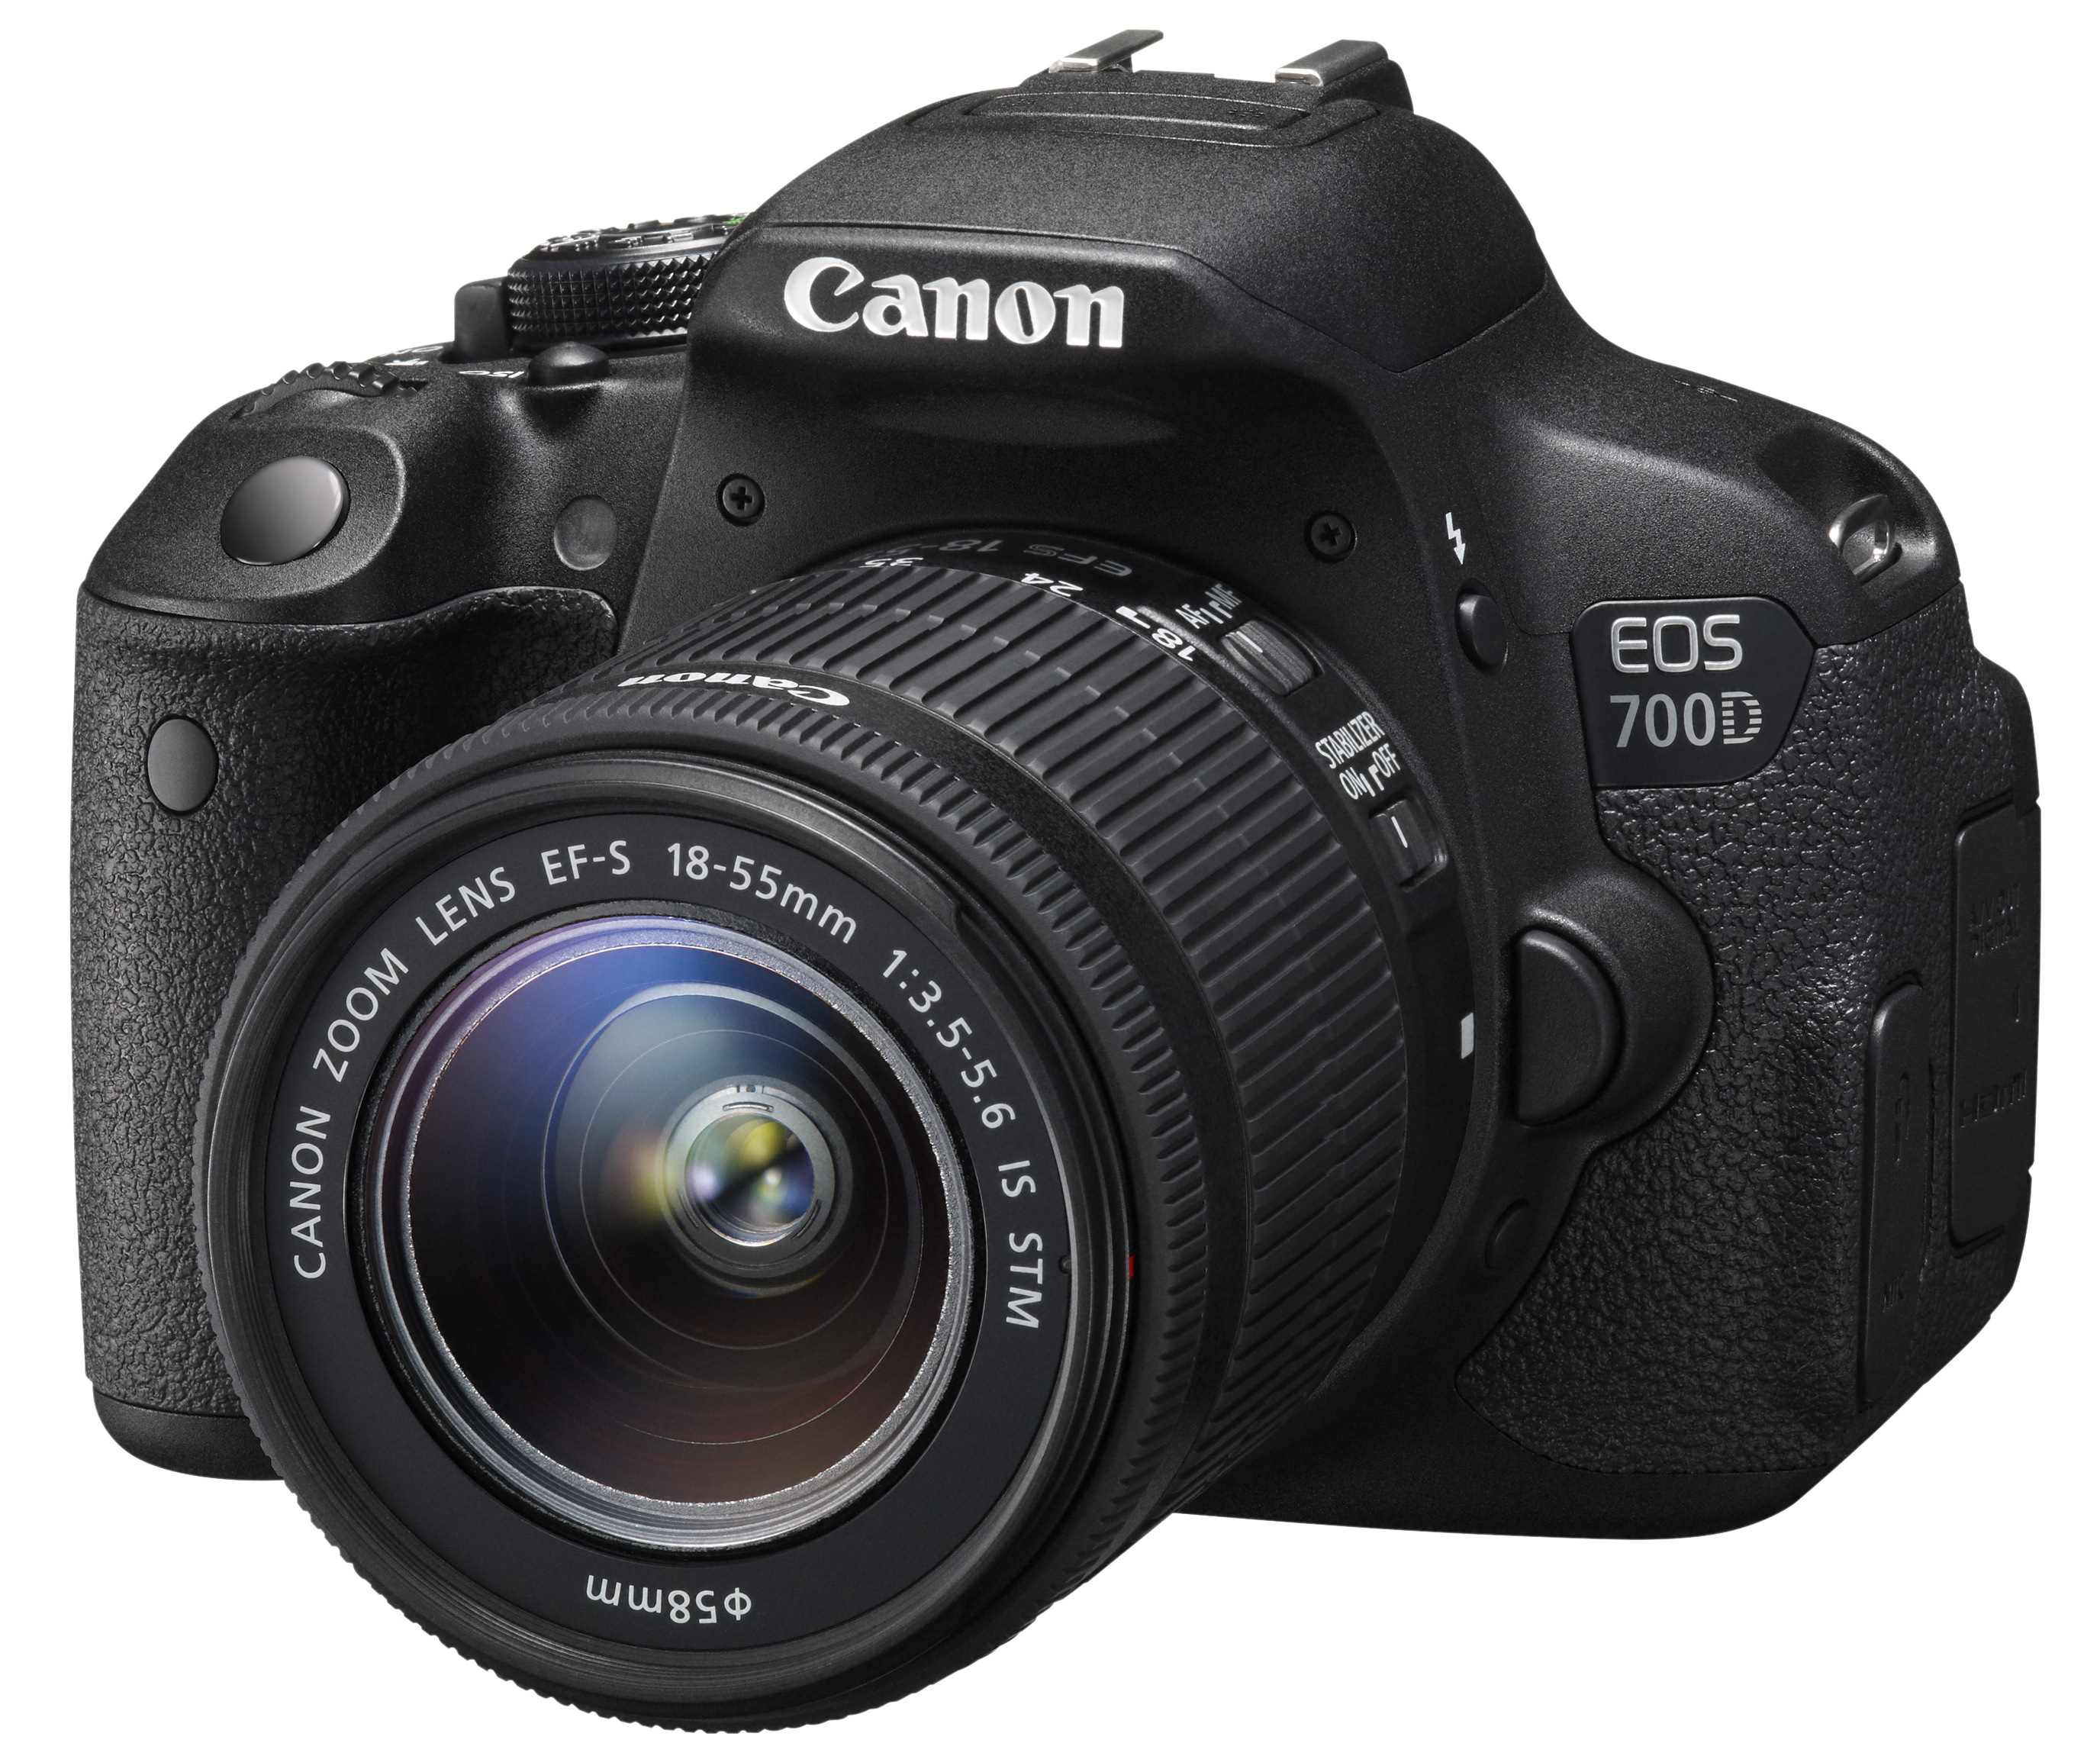 canon eos 700d / rebel t5i key features